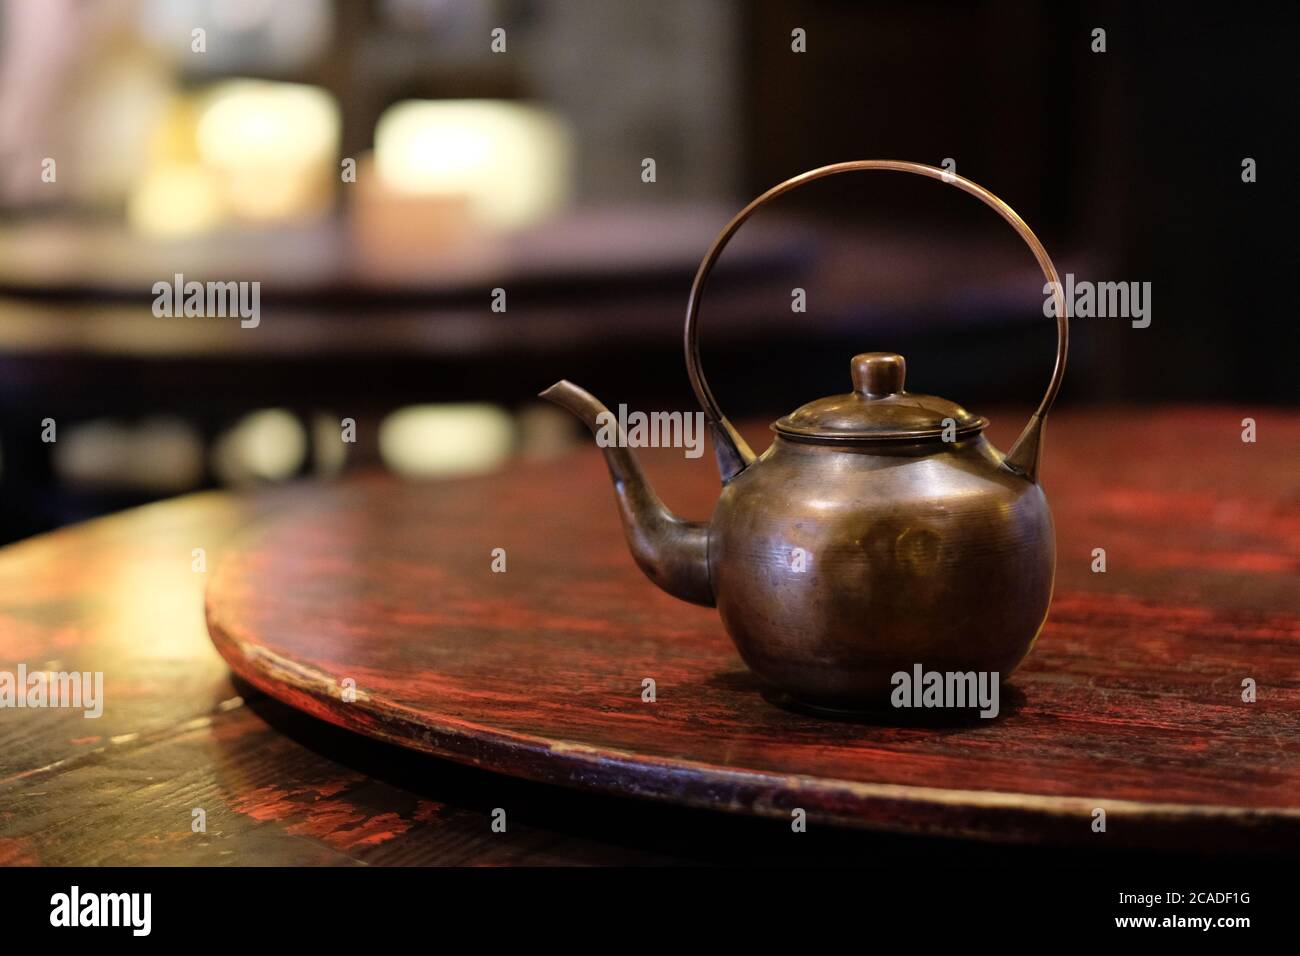 https://c8.alamy.com/comp/2CADF1G/close-up-one-old-copper-teapot-on-wooden-table-traditional-chinese-tea-kettle-bokeh-background-2CADF1G.jpg